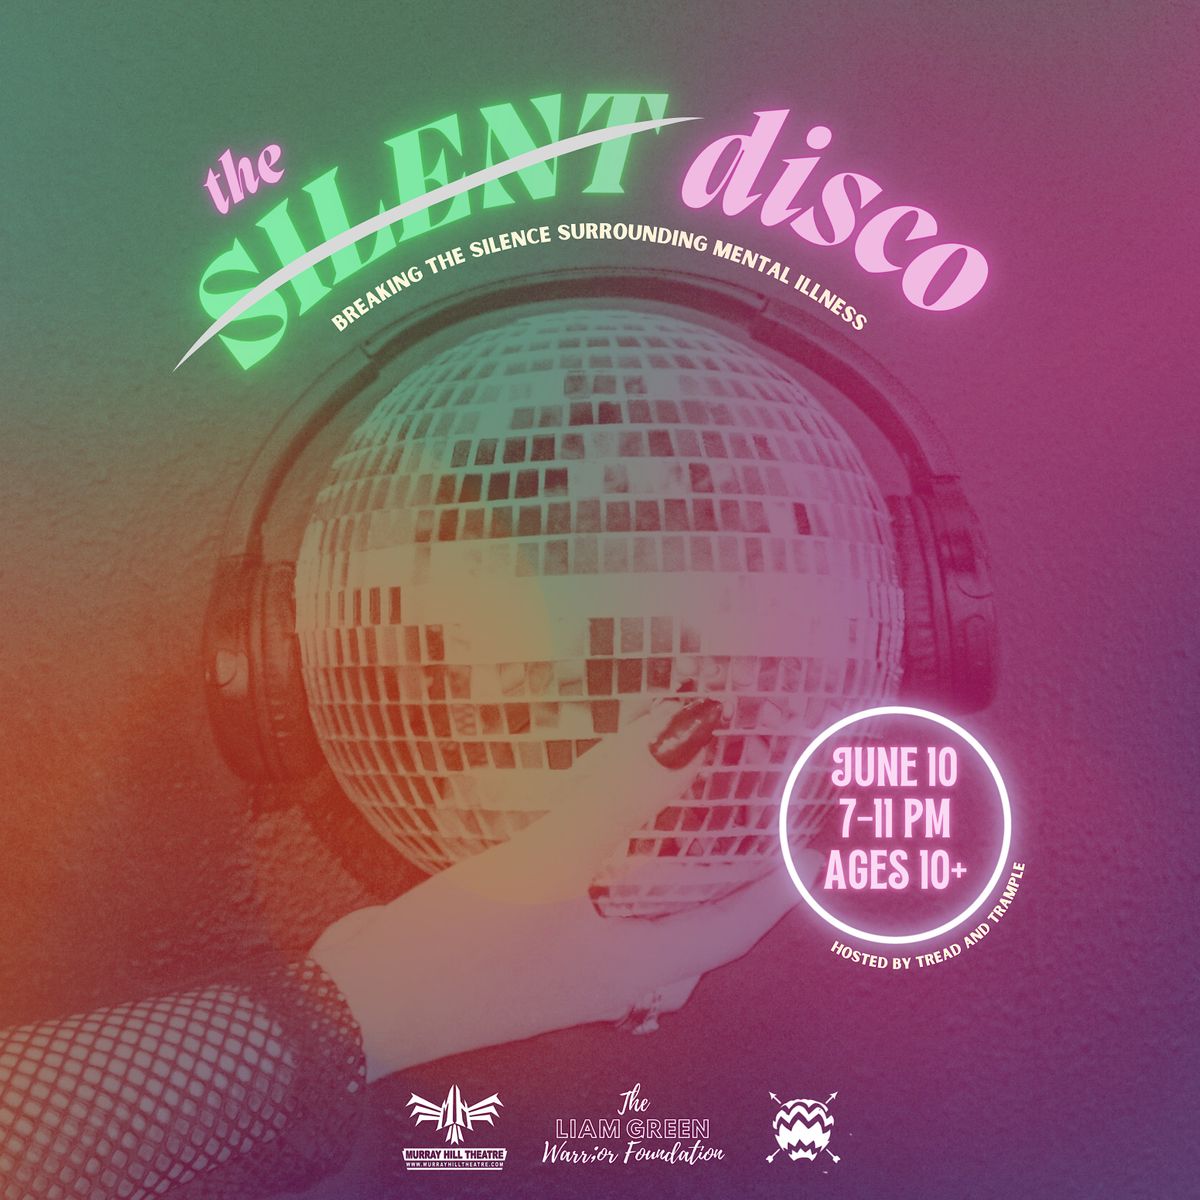 The Silent Disco - Breaking the Silence Surrounding Mental Illness